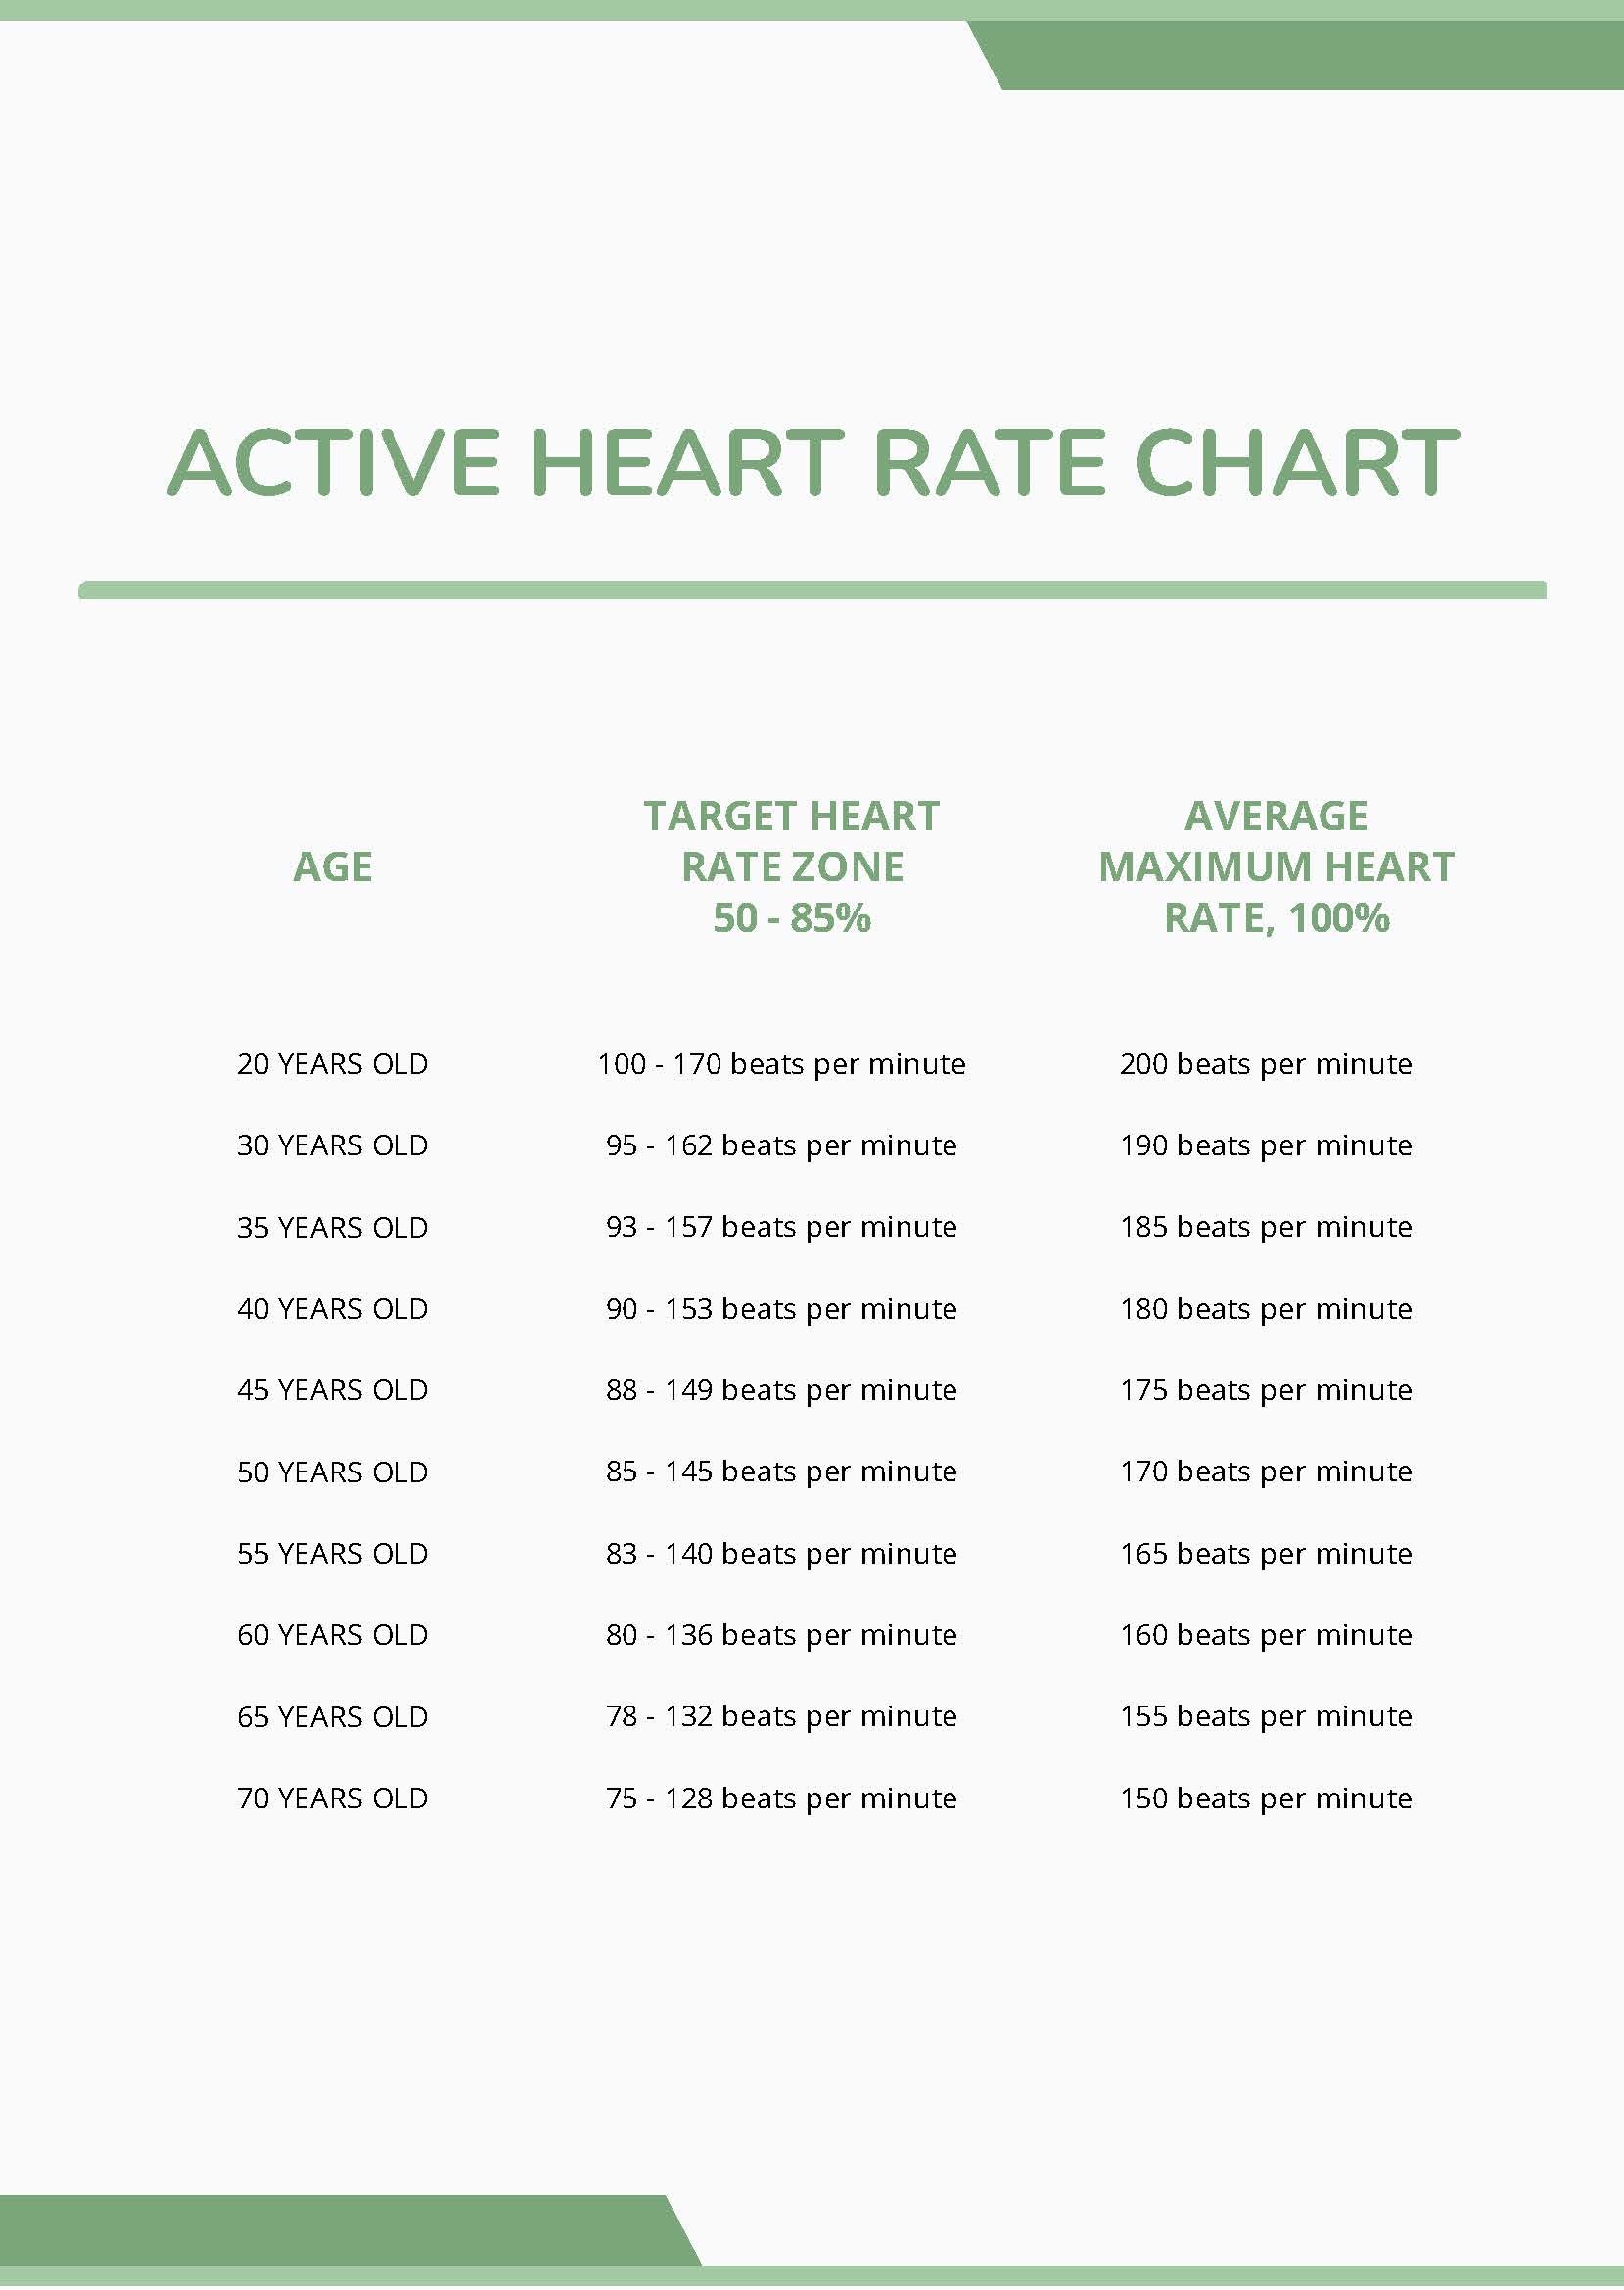 Active Heart Rate Chart in PDF